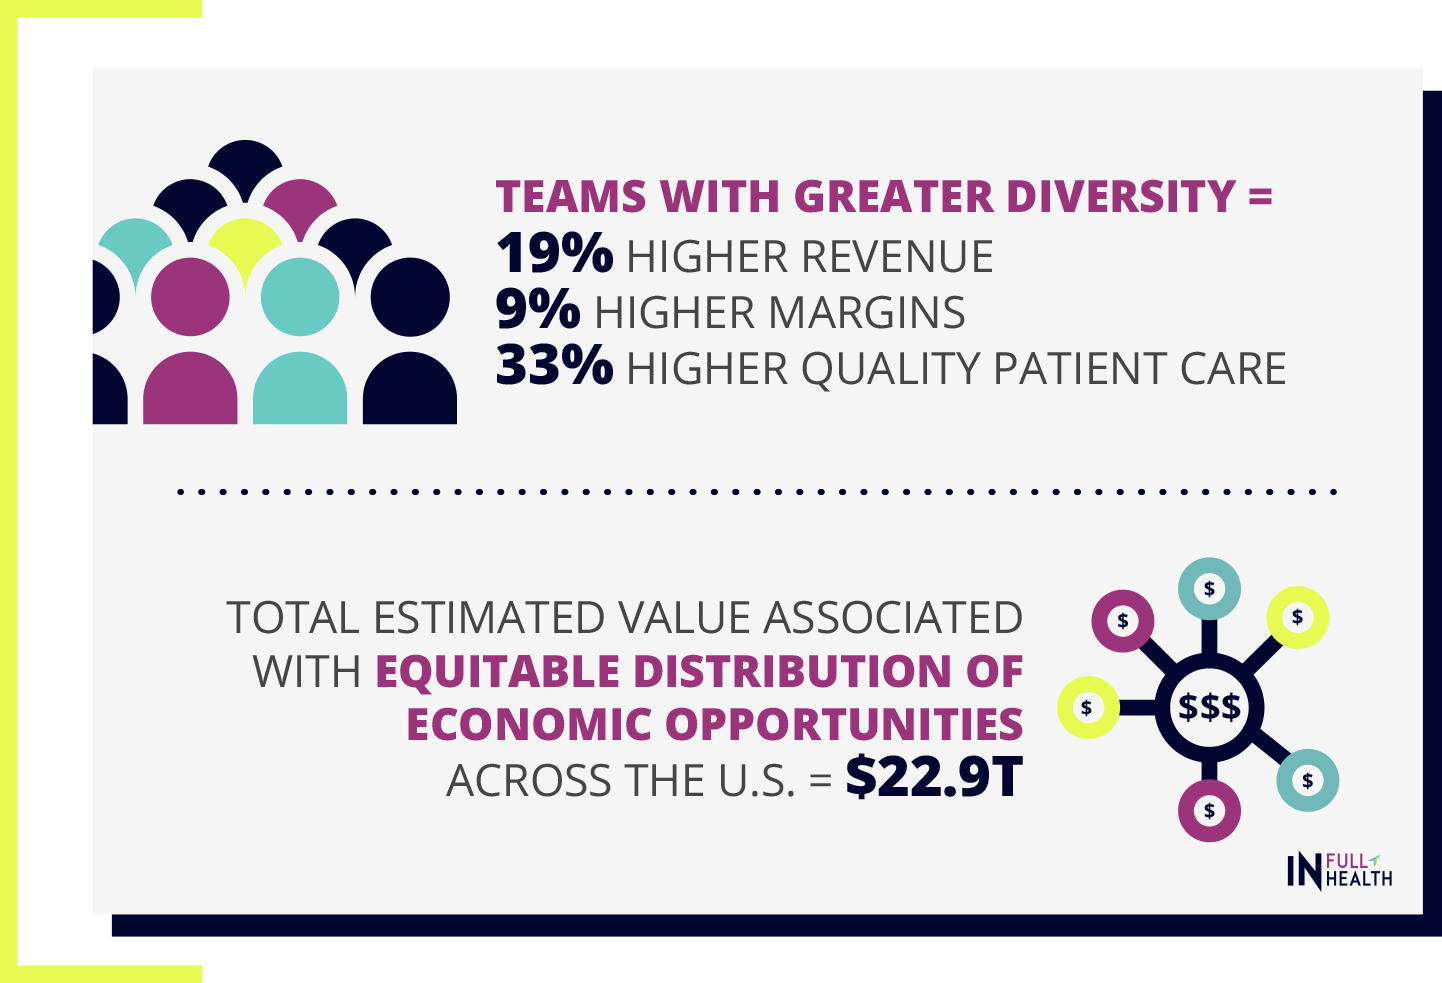 Teams with greater diversity equal 19% higher revenue, 9% higher margins, and 33% higher quality patient care. Total estimated value associated with equitable distribution of economic opportunities across the U.S. equals $22.9T.